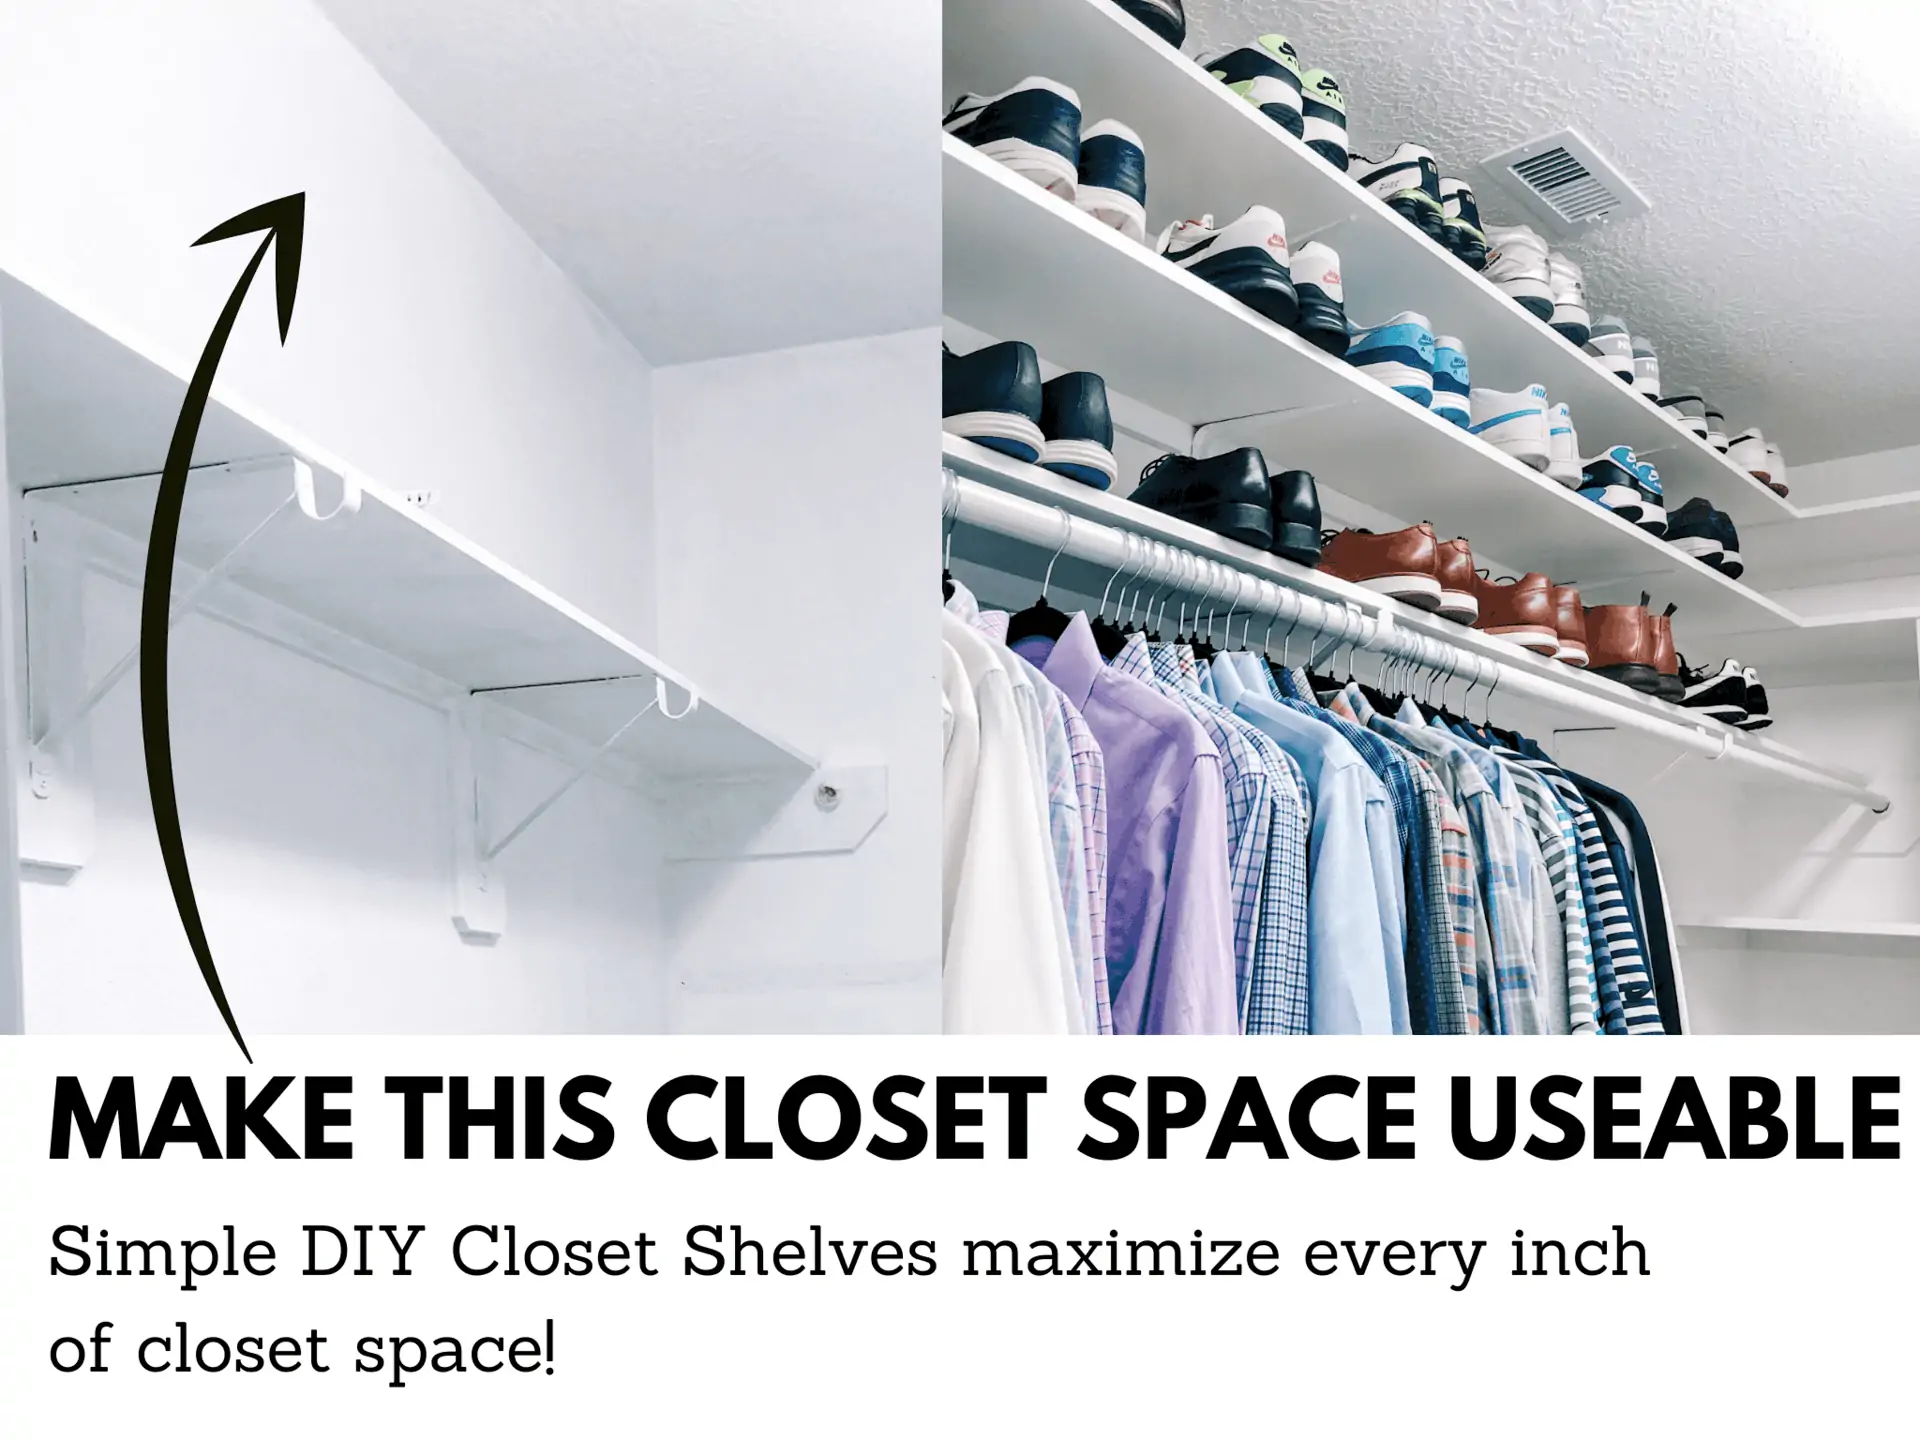 https://www.thediyvibe.com/wp-content/uploads/2021/09/Simple-DIY-Closet-Space-to-make-more-useable-space.webp